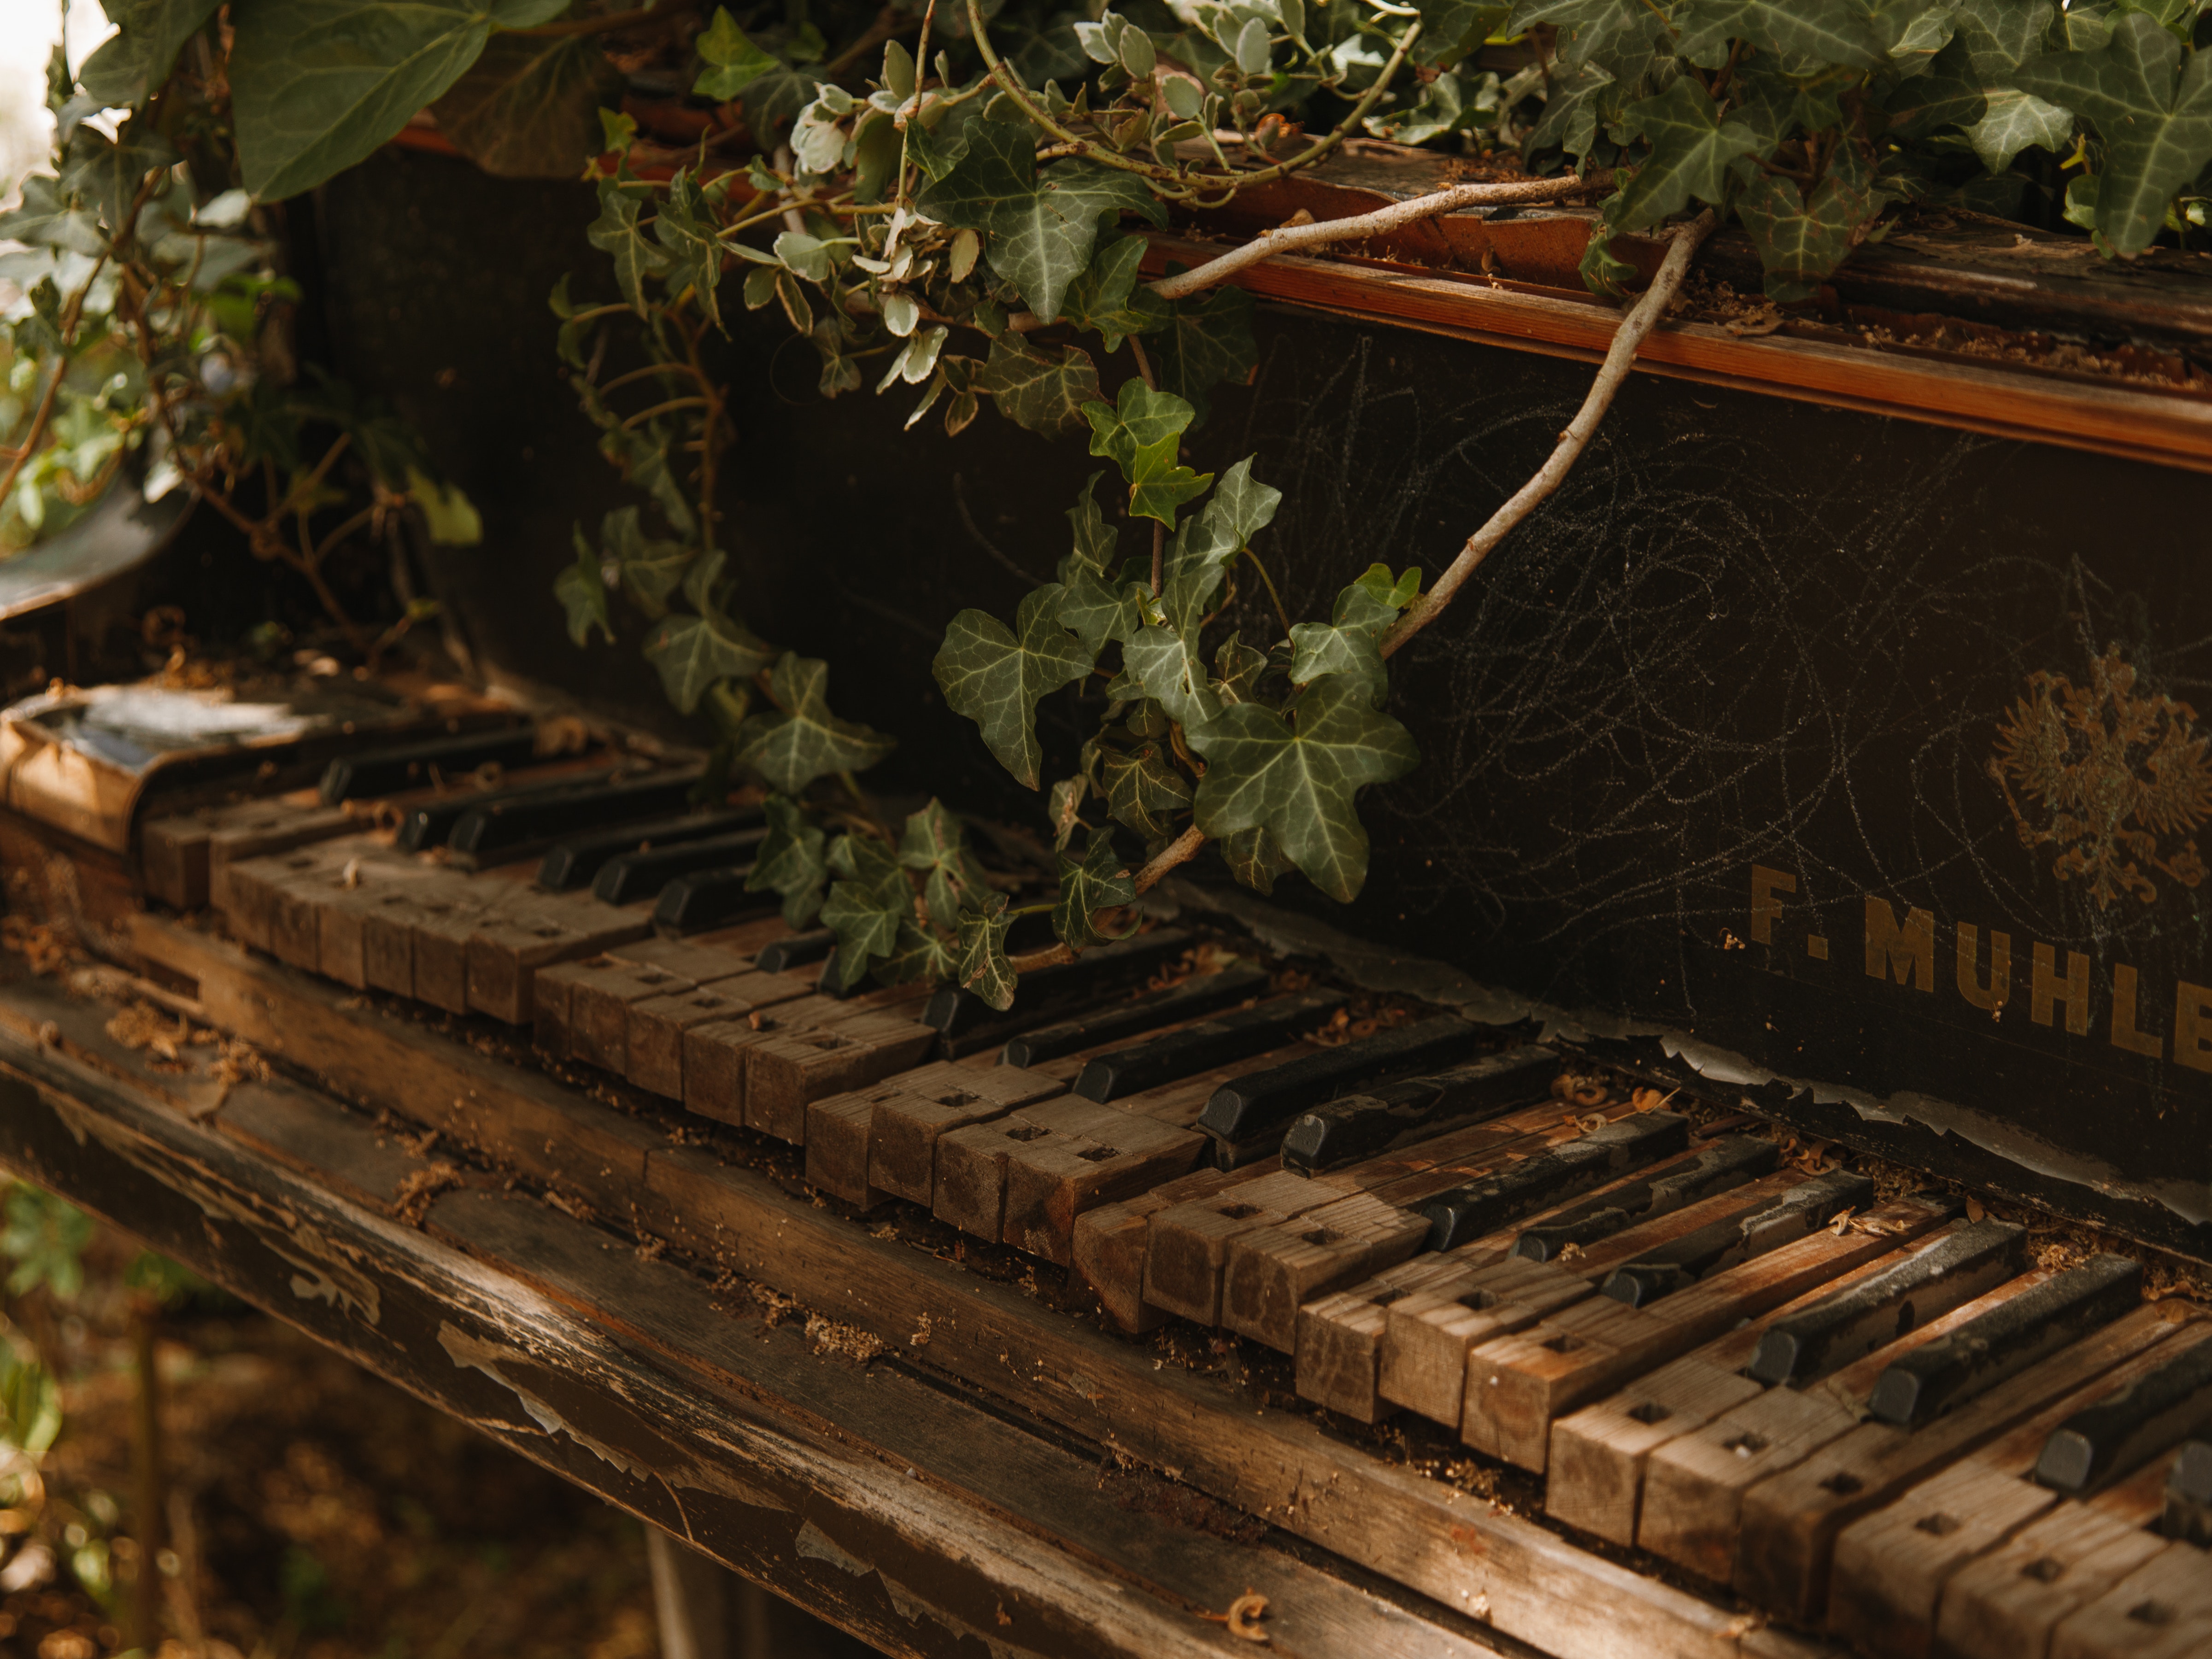 An old Piano